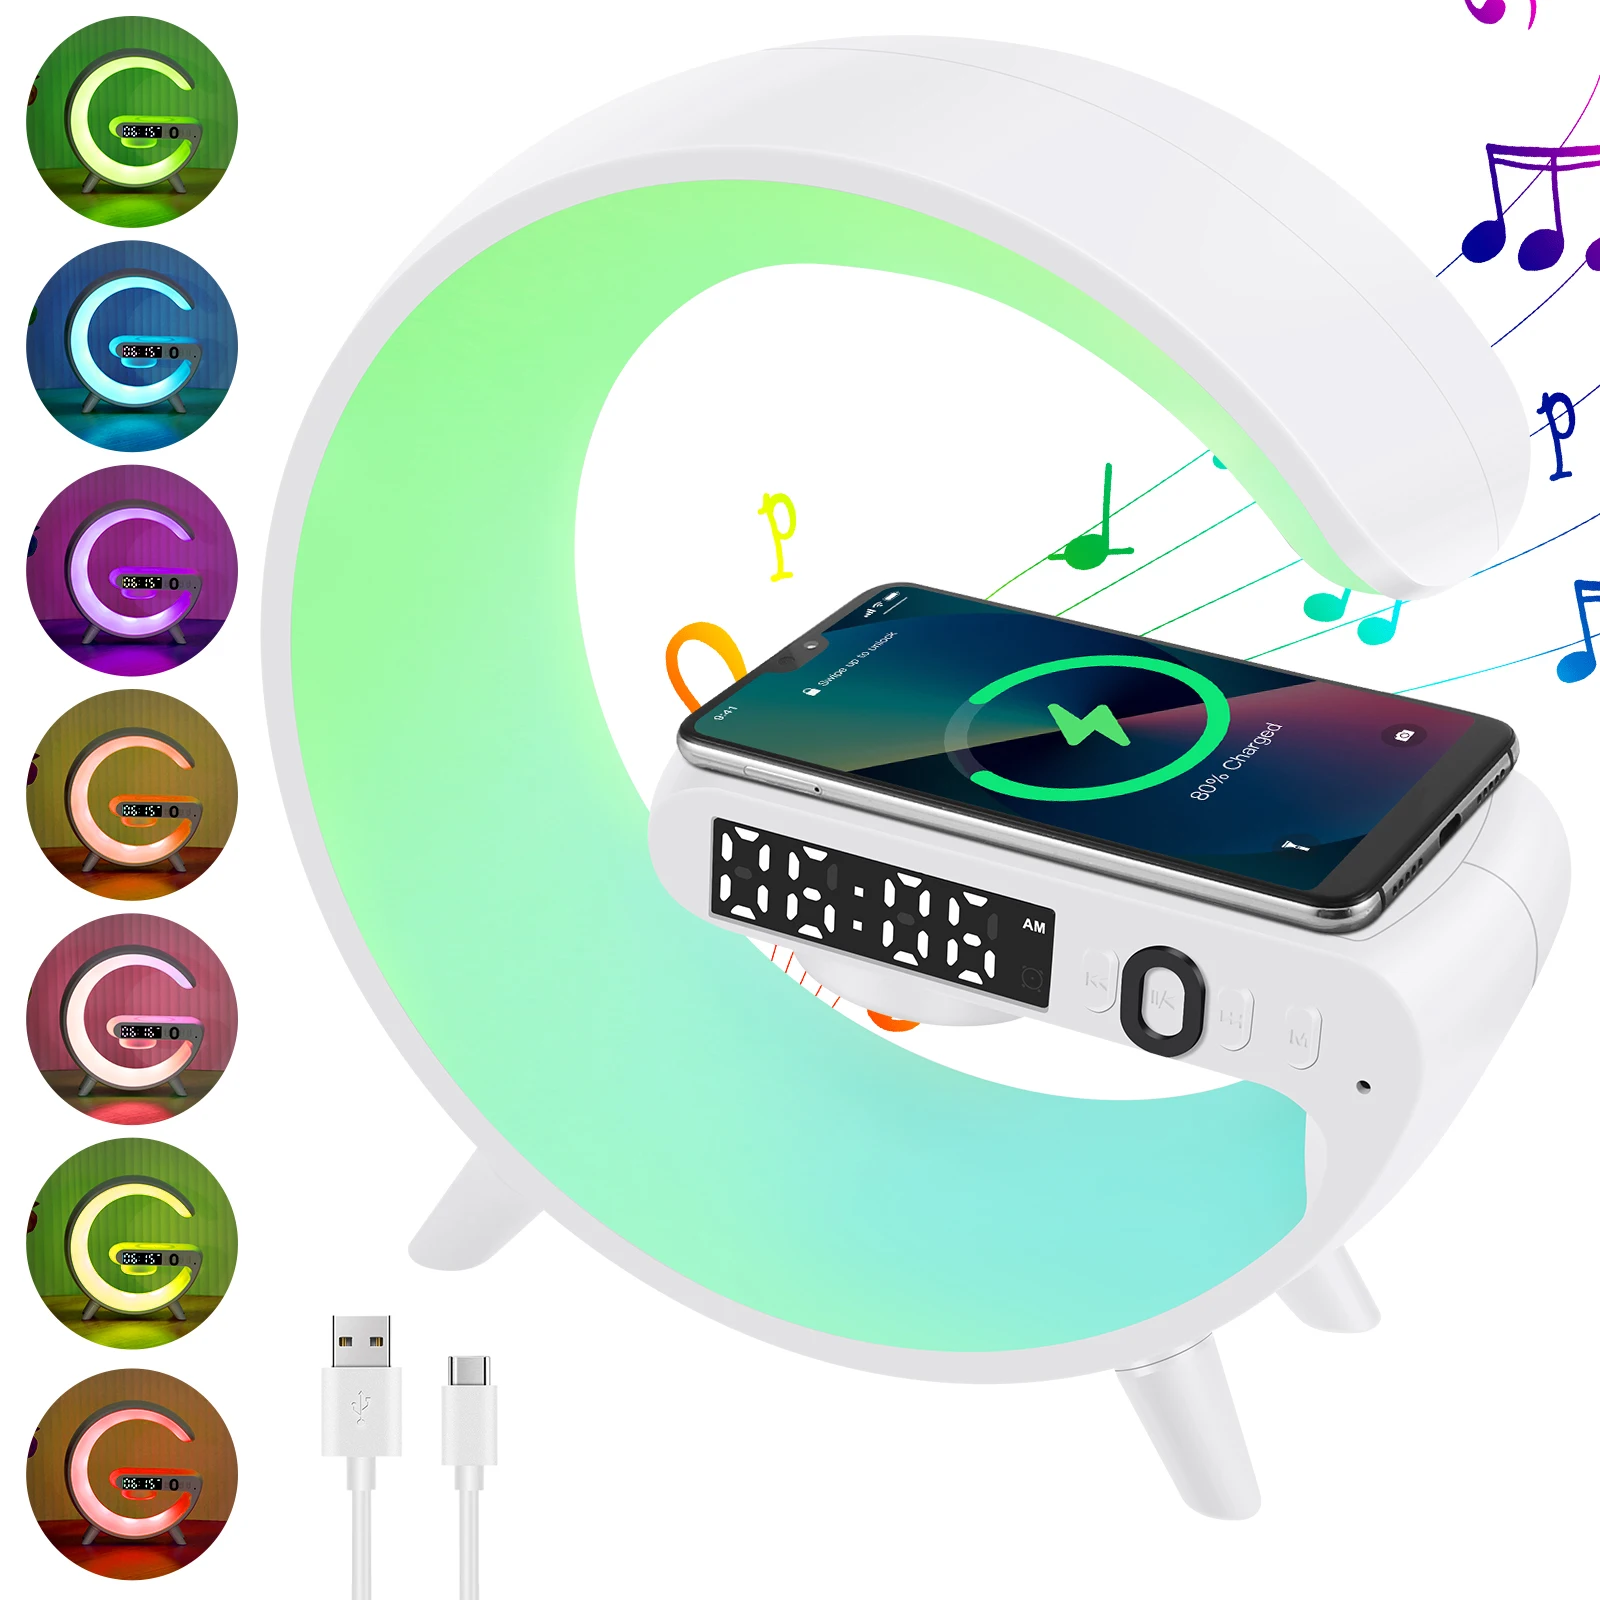 

New Wireless Speaker Charger Clock Light with Display Colorful Bluetooth Speaker Ambient Light Multifunctional Bedside Lamp